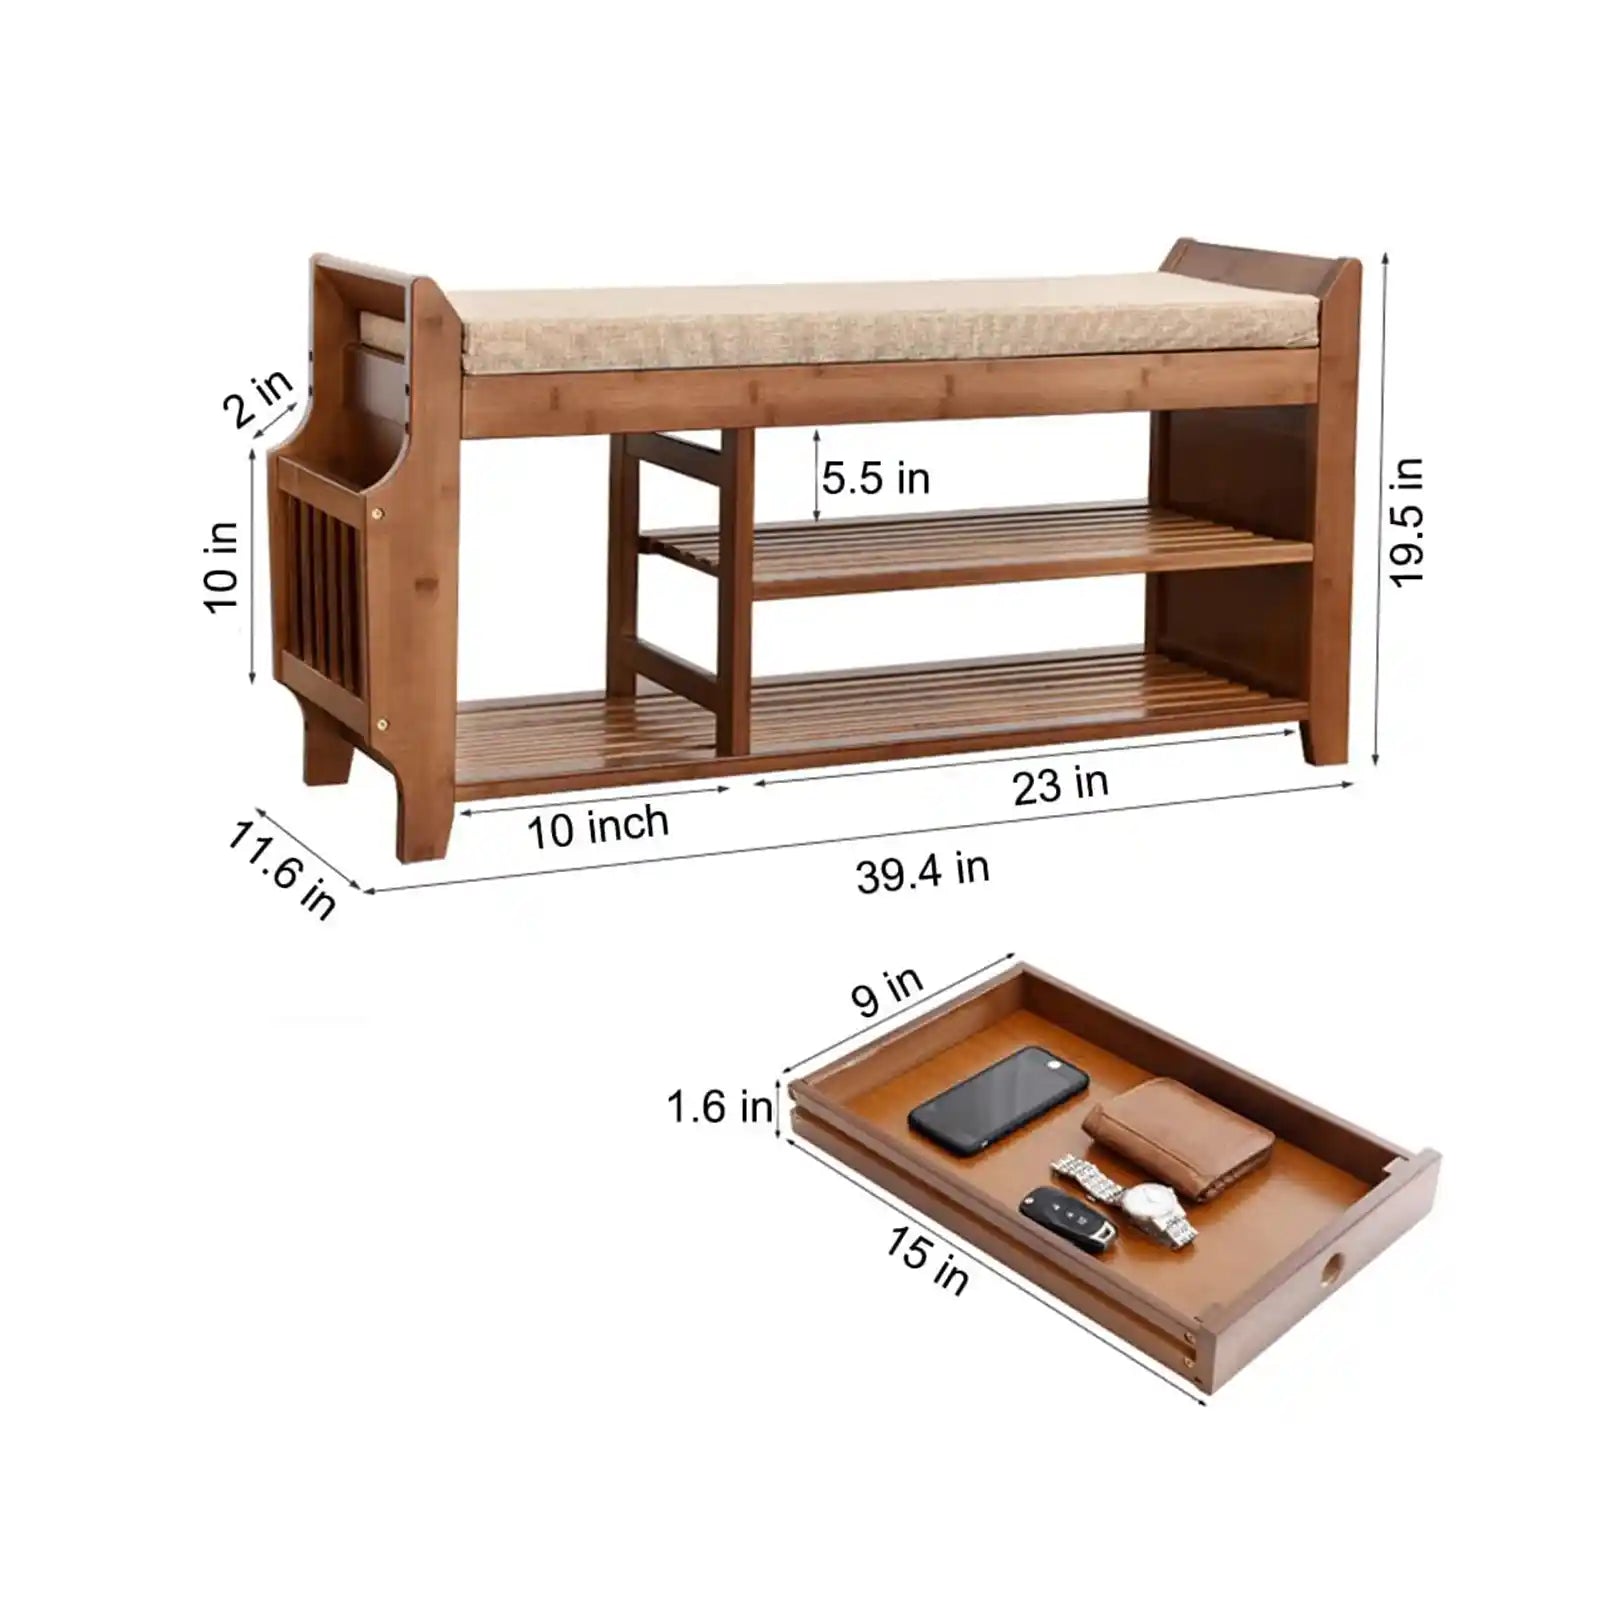 Unique Design Shoe Bench with Hidden Drawer and Side Holder | Premium Quality Bamboo Construction | Easy to Clean | Ample Storage Capacity